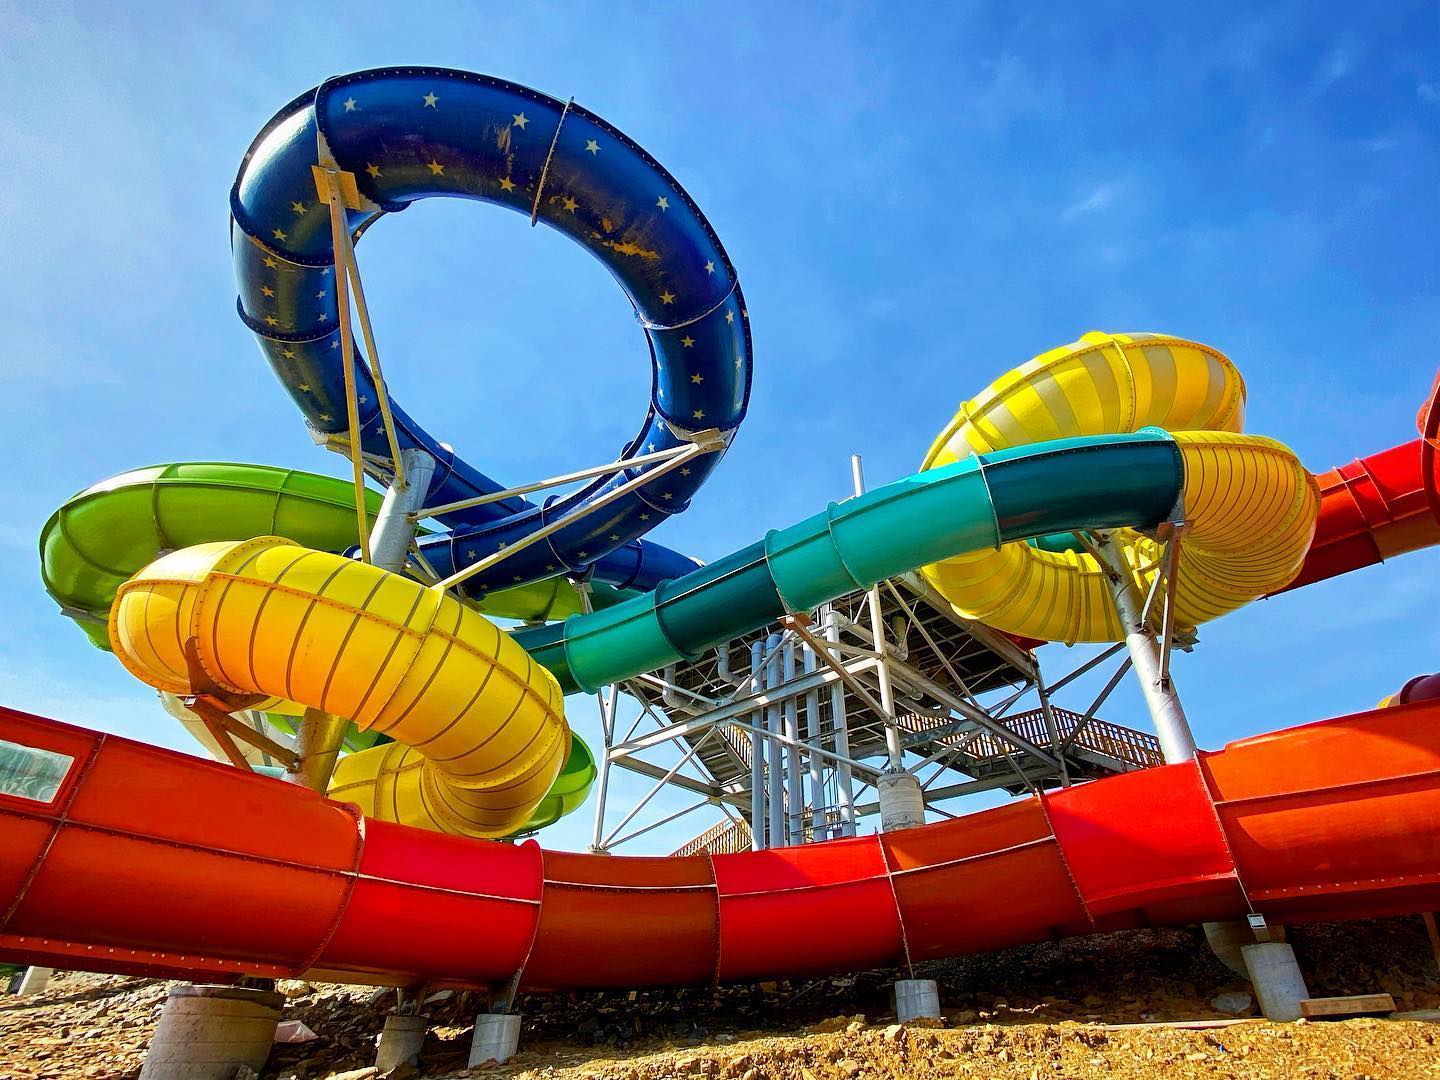 Soaky Mountain Waterpark to announce opening date! Hometown Sevier